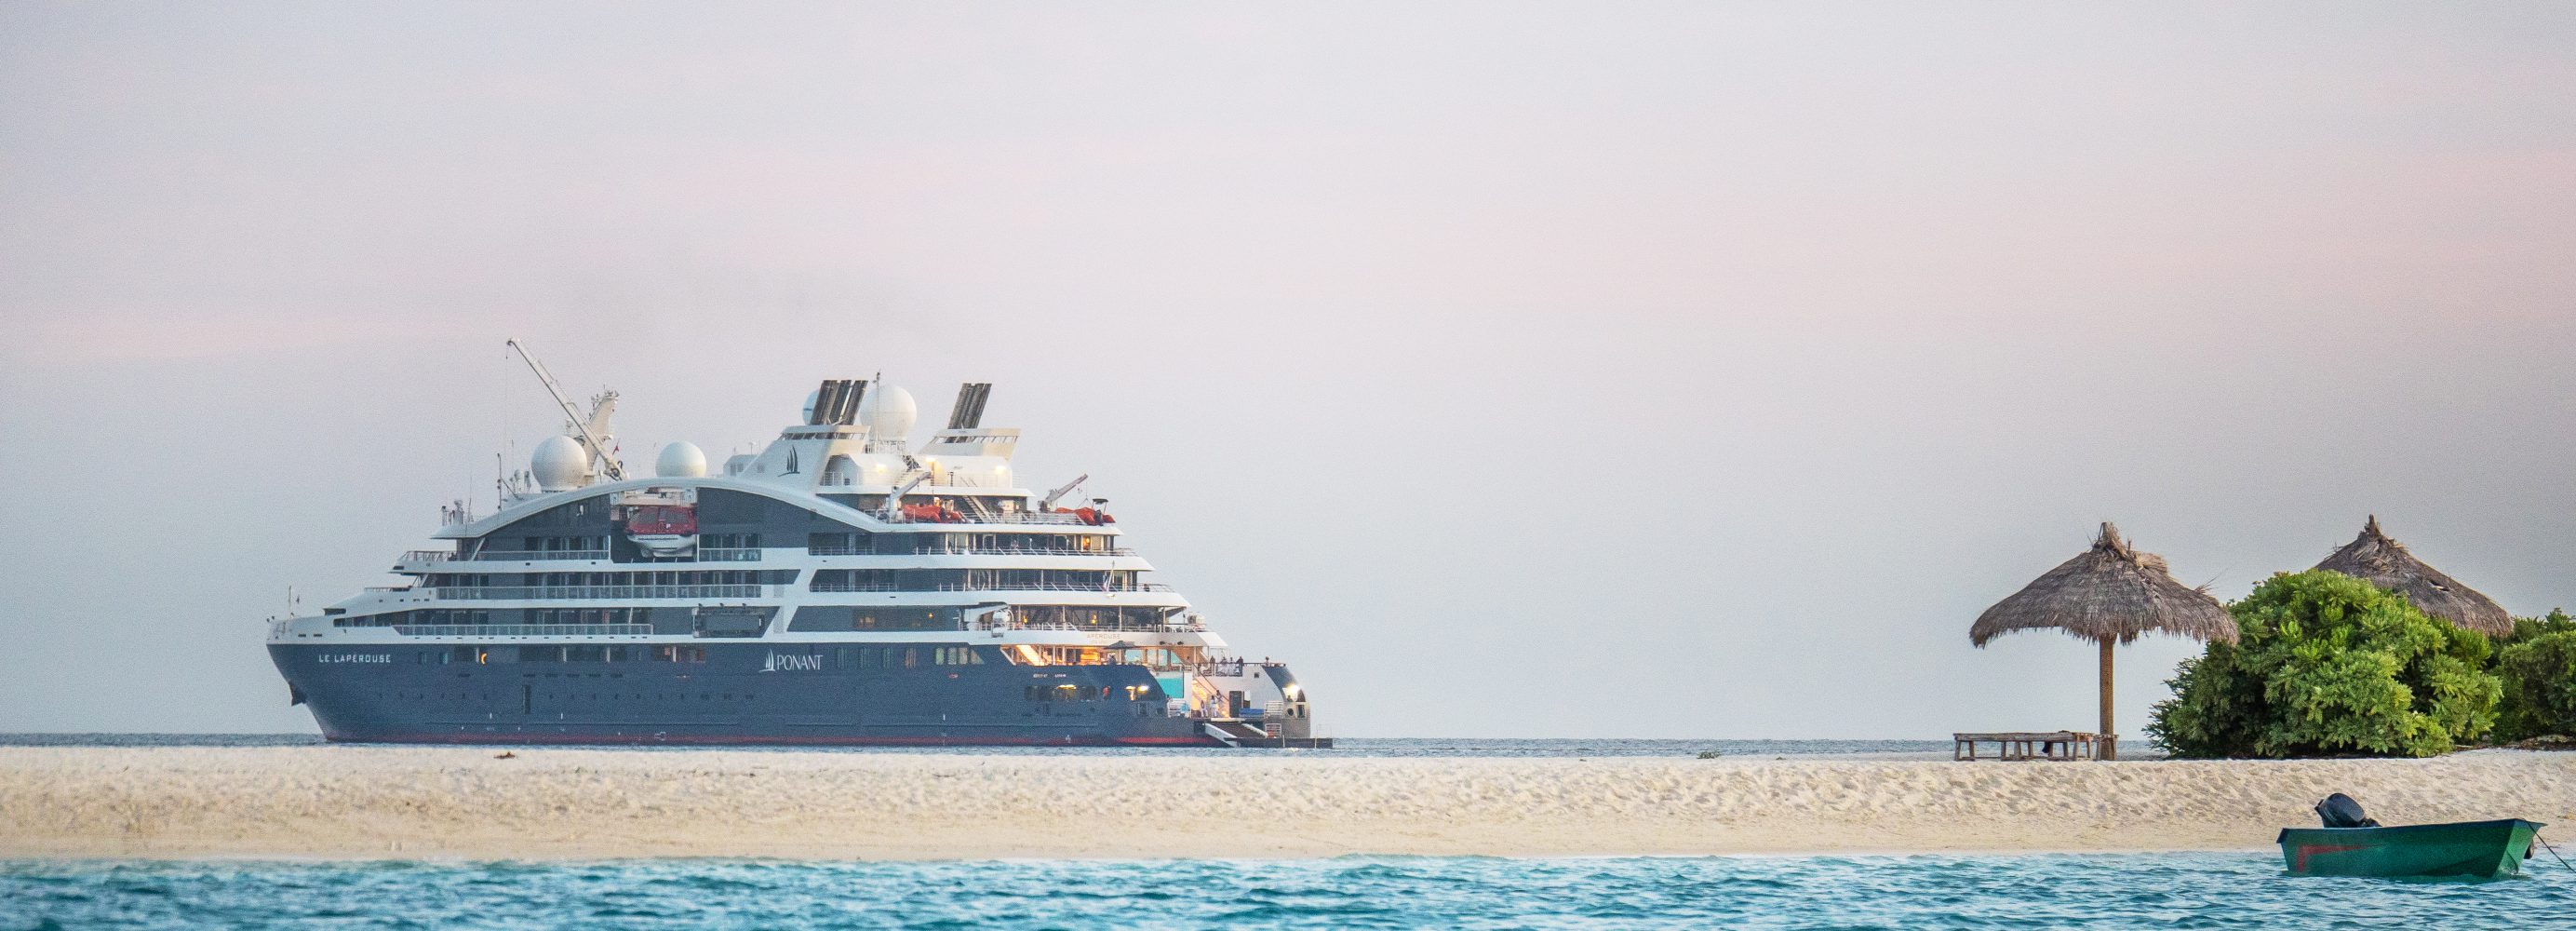 Explore under water on the high seas with Ponant's scuba diving cruises